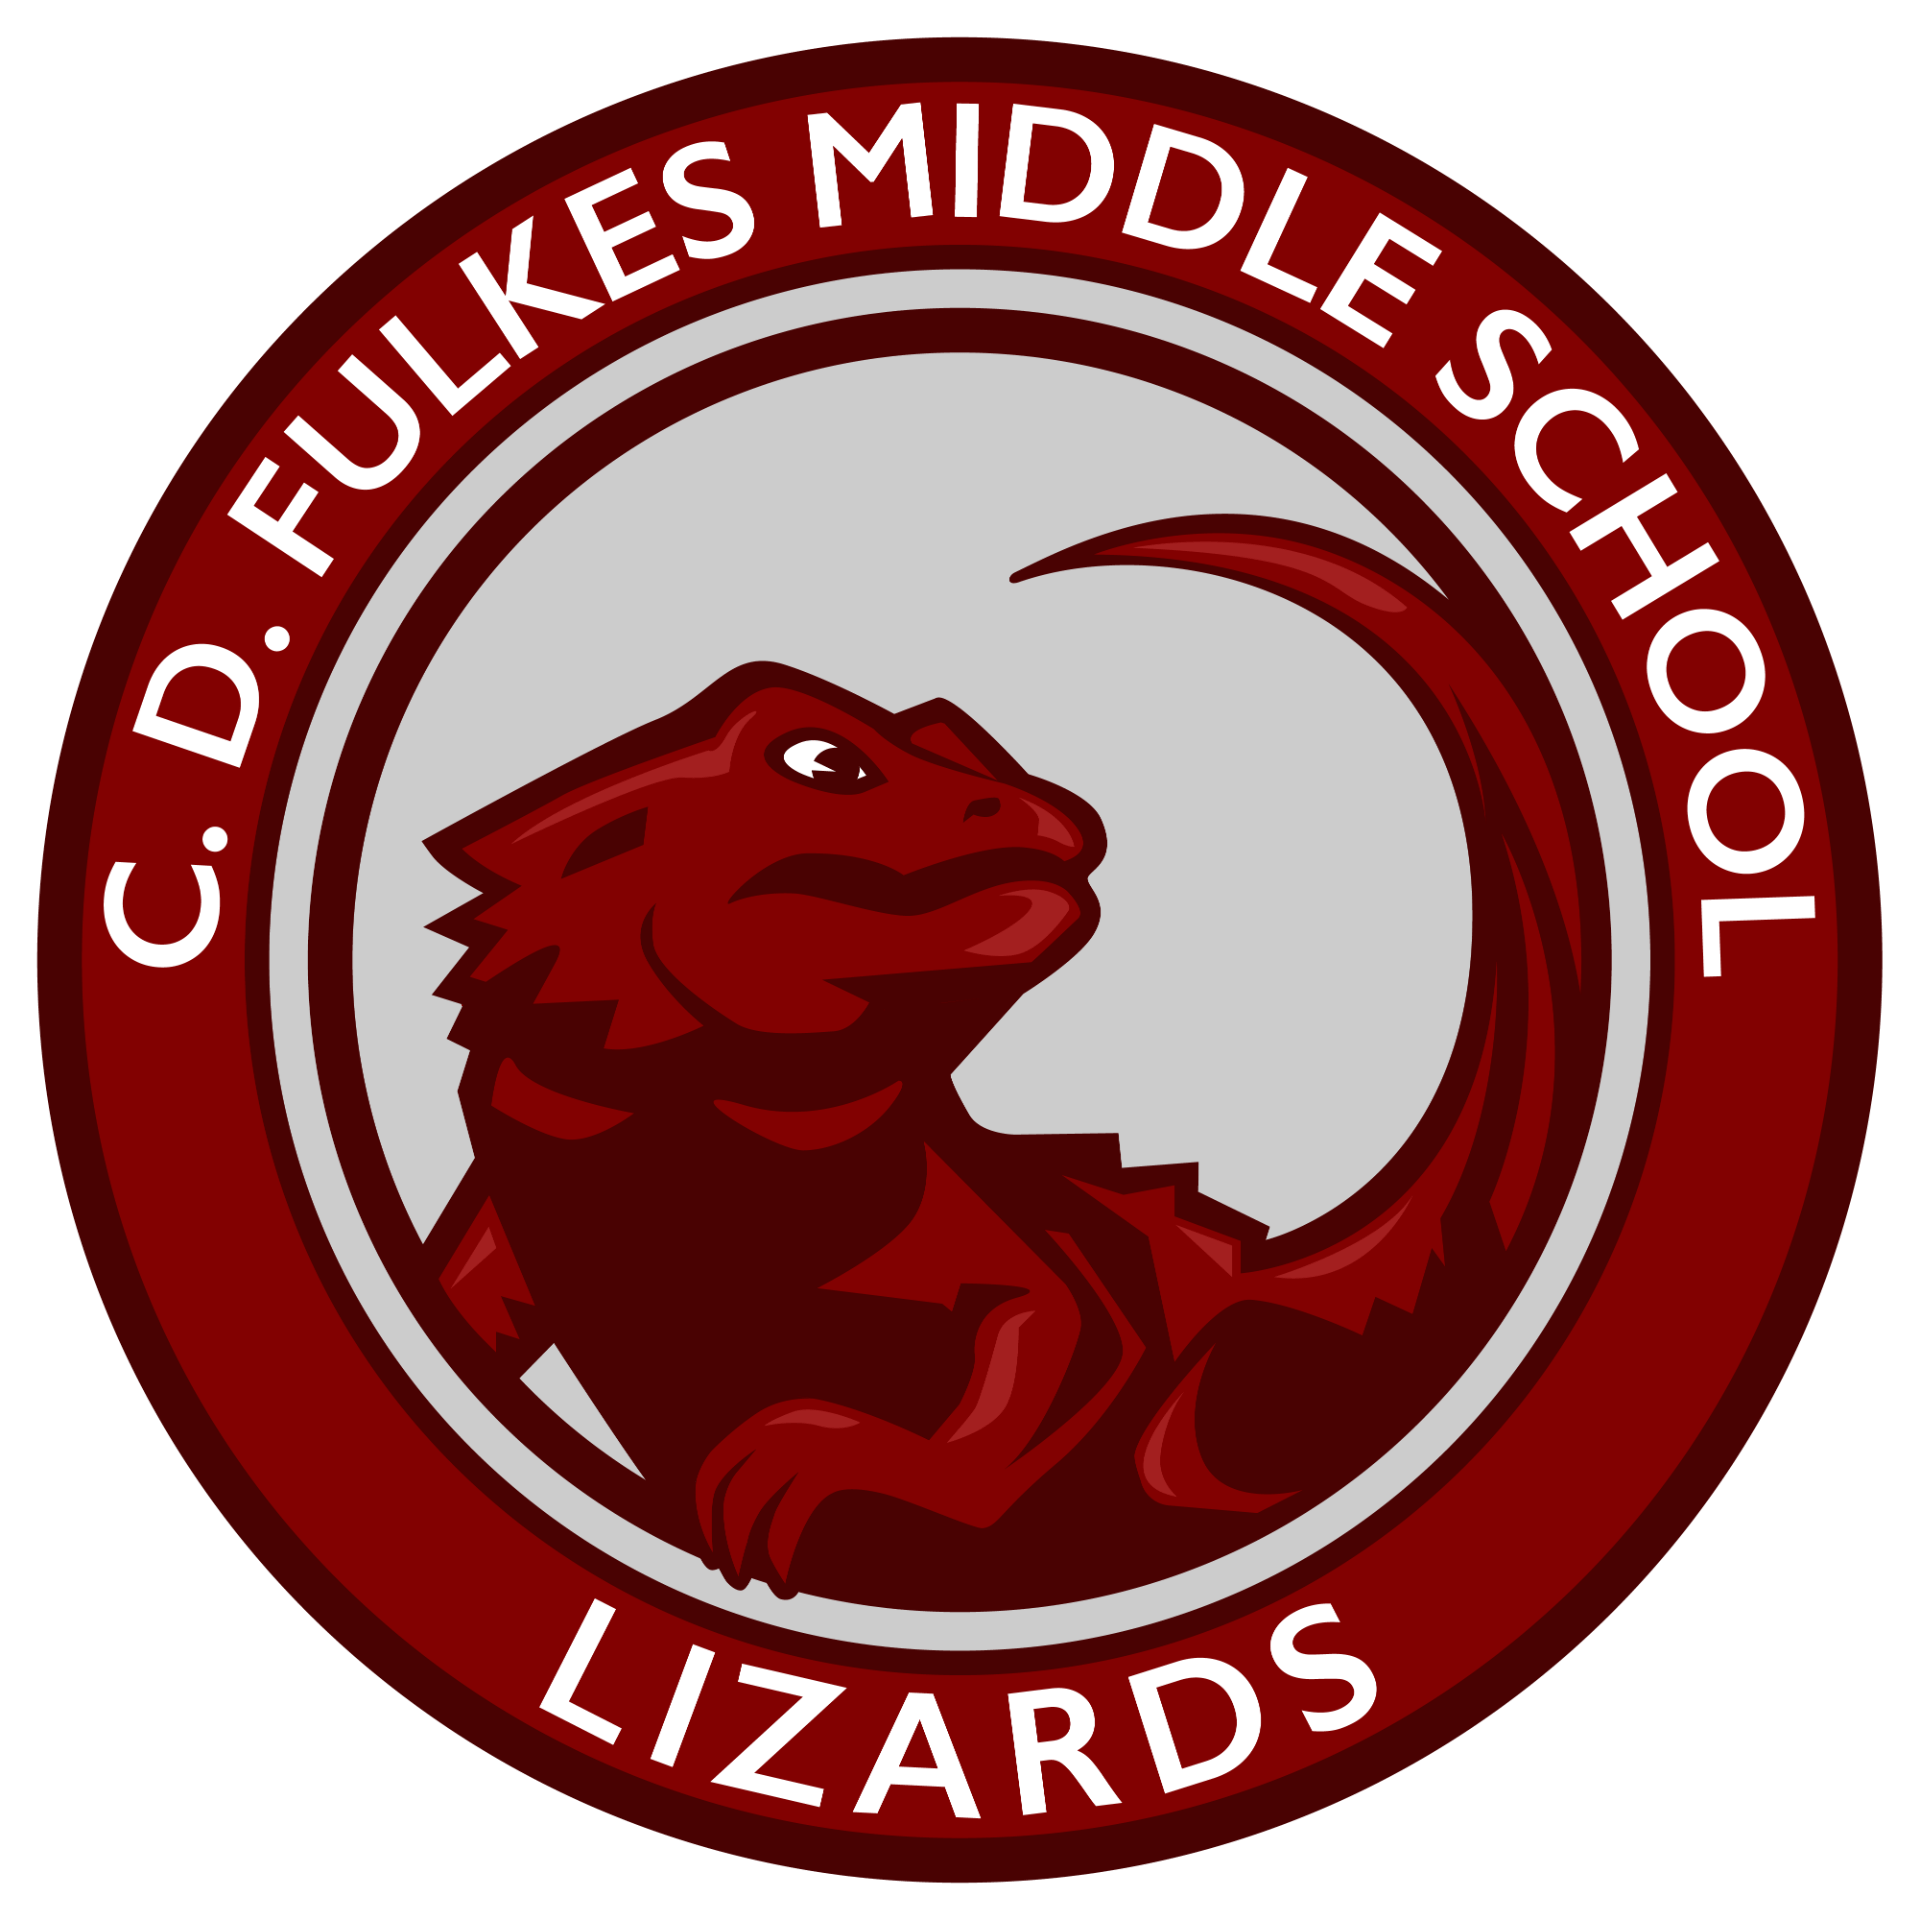 CD Fulkes Middle School - Round Rock ISD